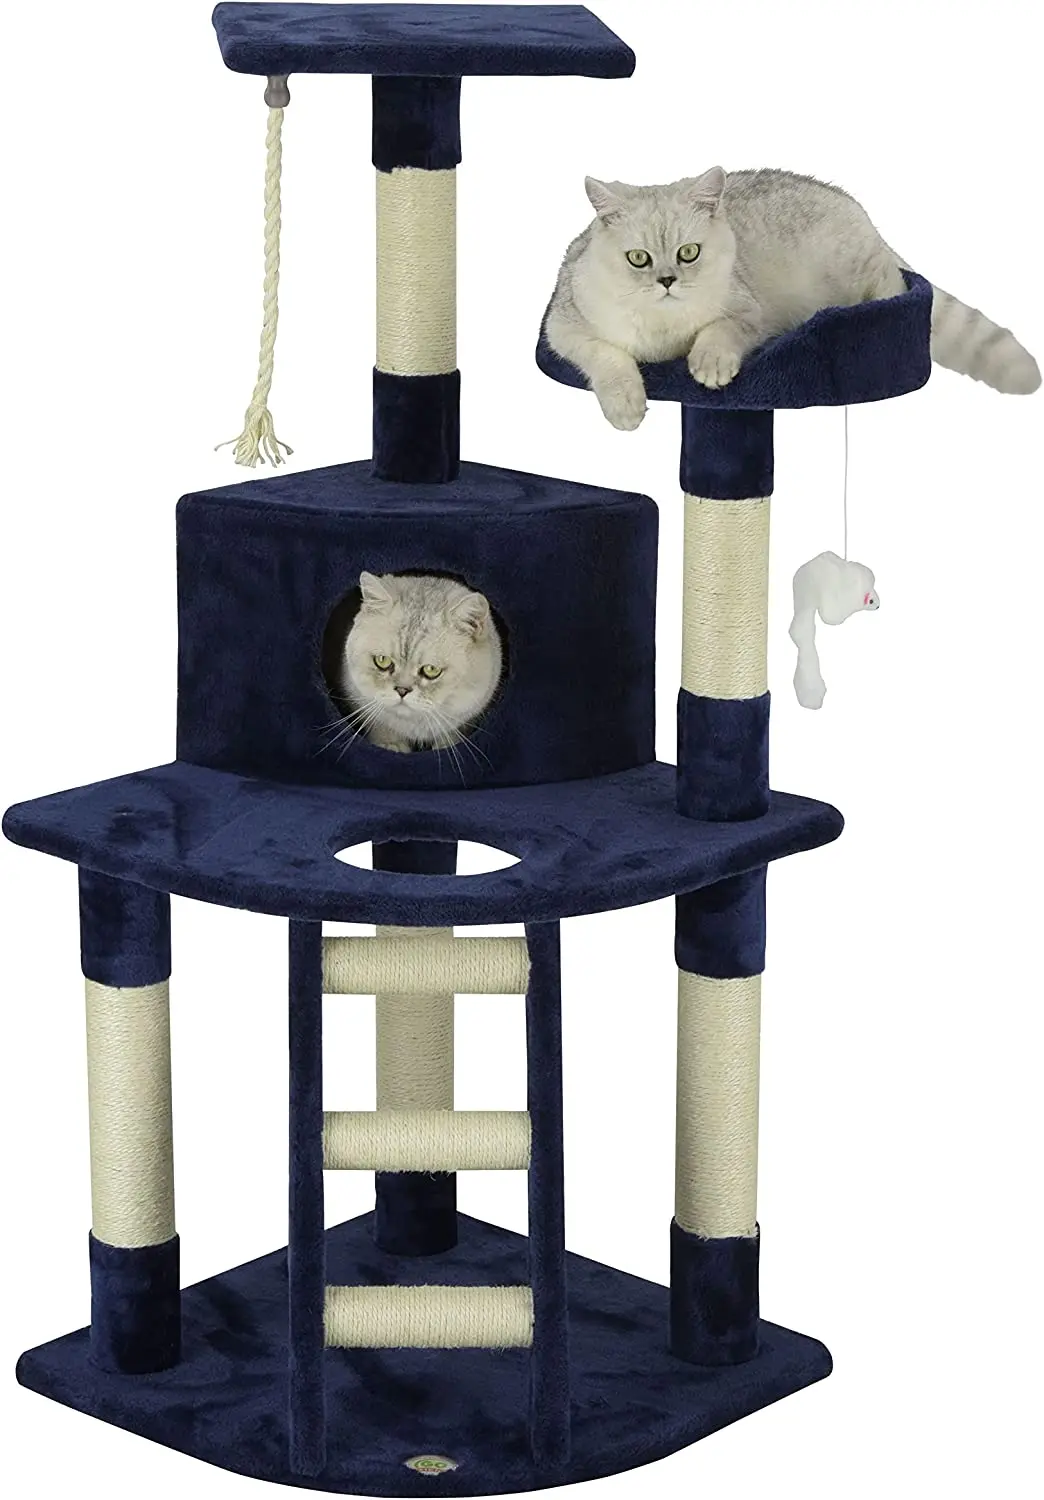 

48" Corner Cat Tree Kitty Condo Kitten Tower Furniture with Multiple Scratching Posts, Sisal Covered Ladder, Plush Condo Pla